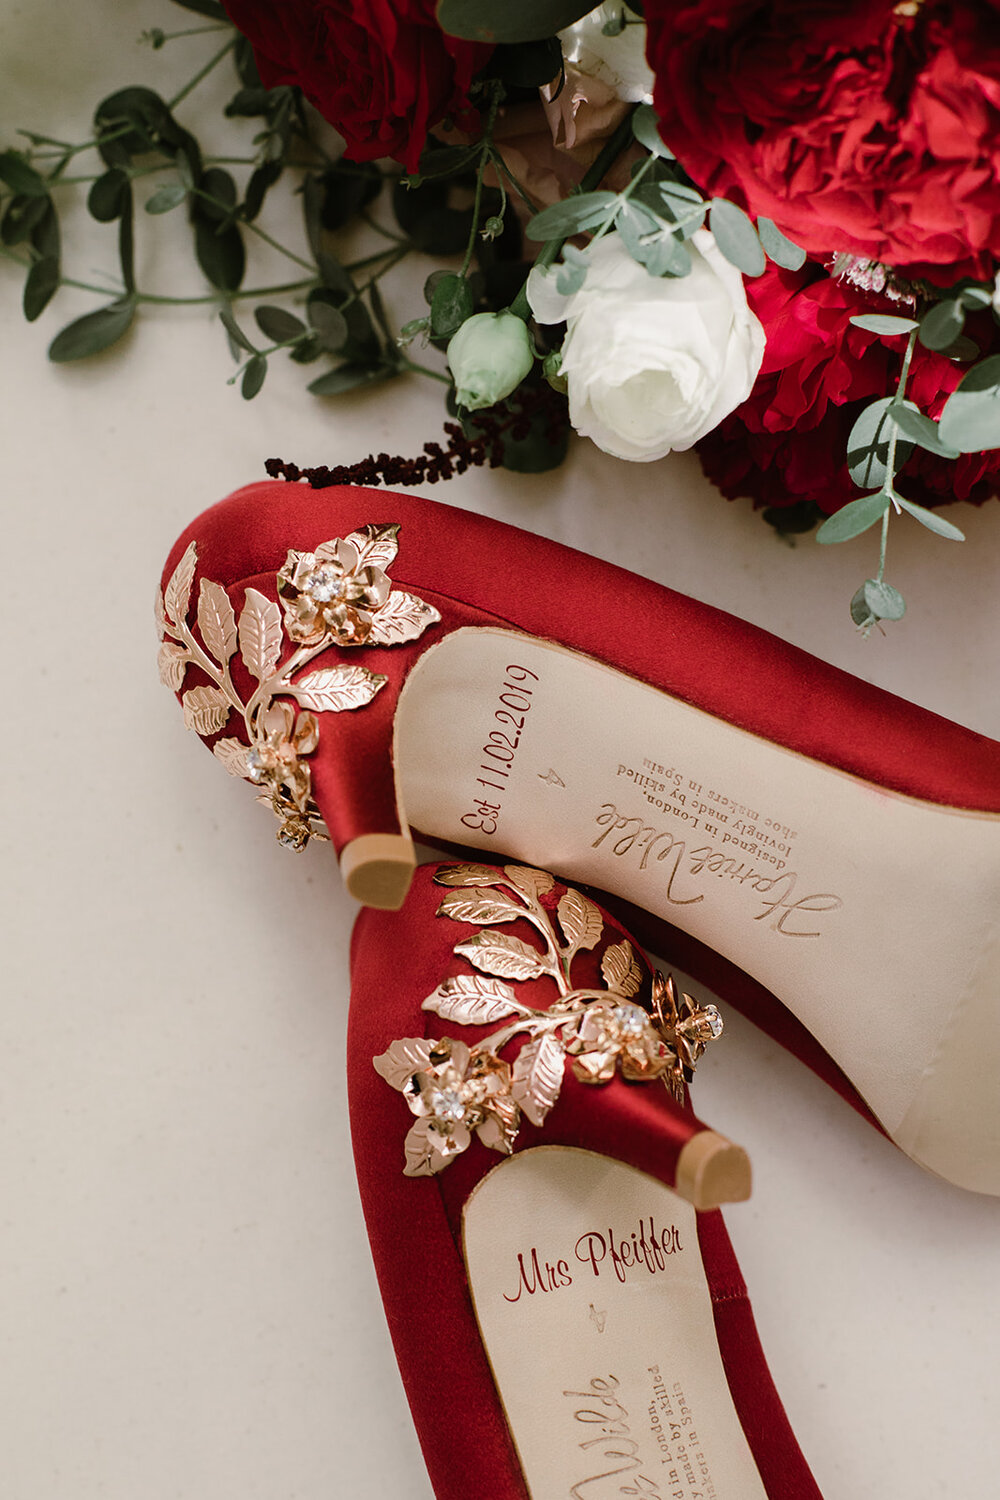 Harriet Wilde Heels | Black tie wedding with a red tux and custom Anne Barge gown | Romantic wedding at St. Bridget and The Omni Hotel in Richmond, VA.